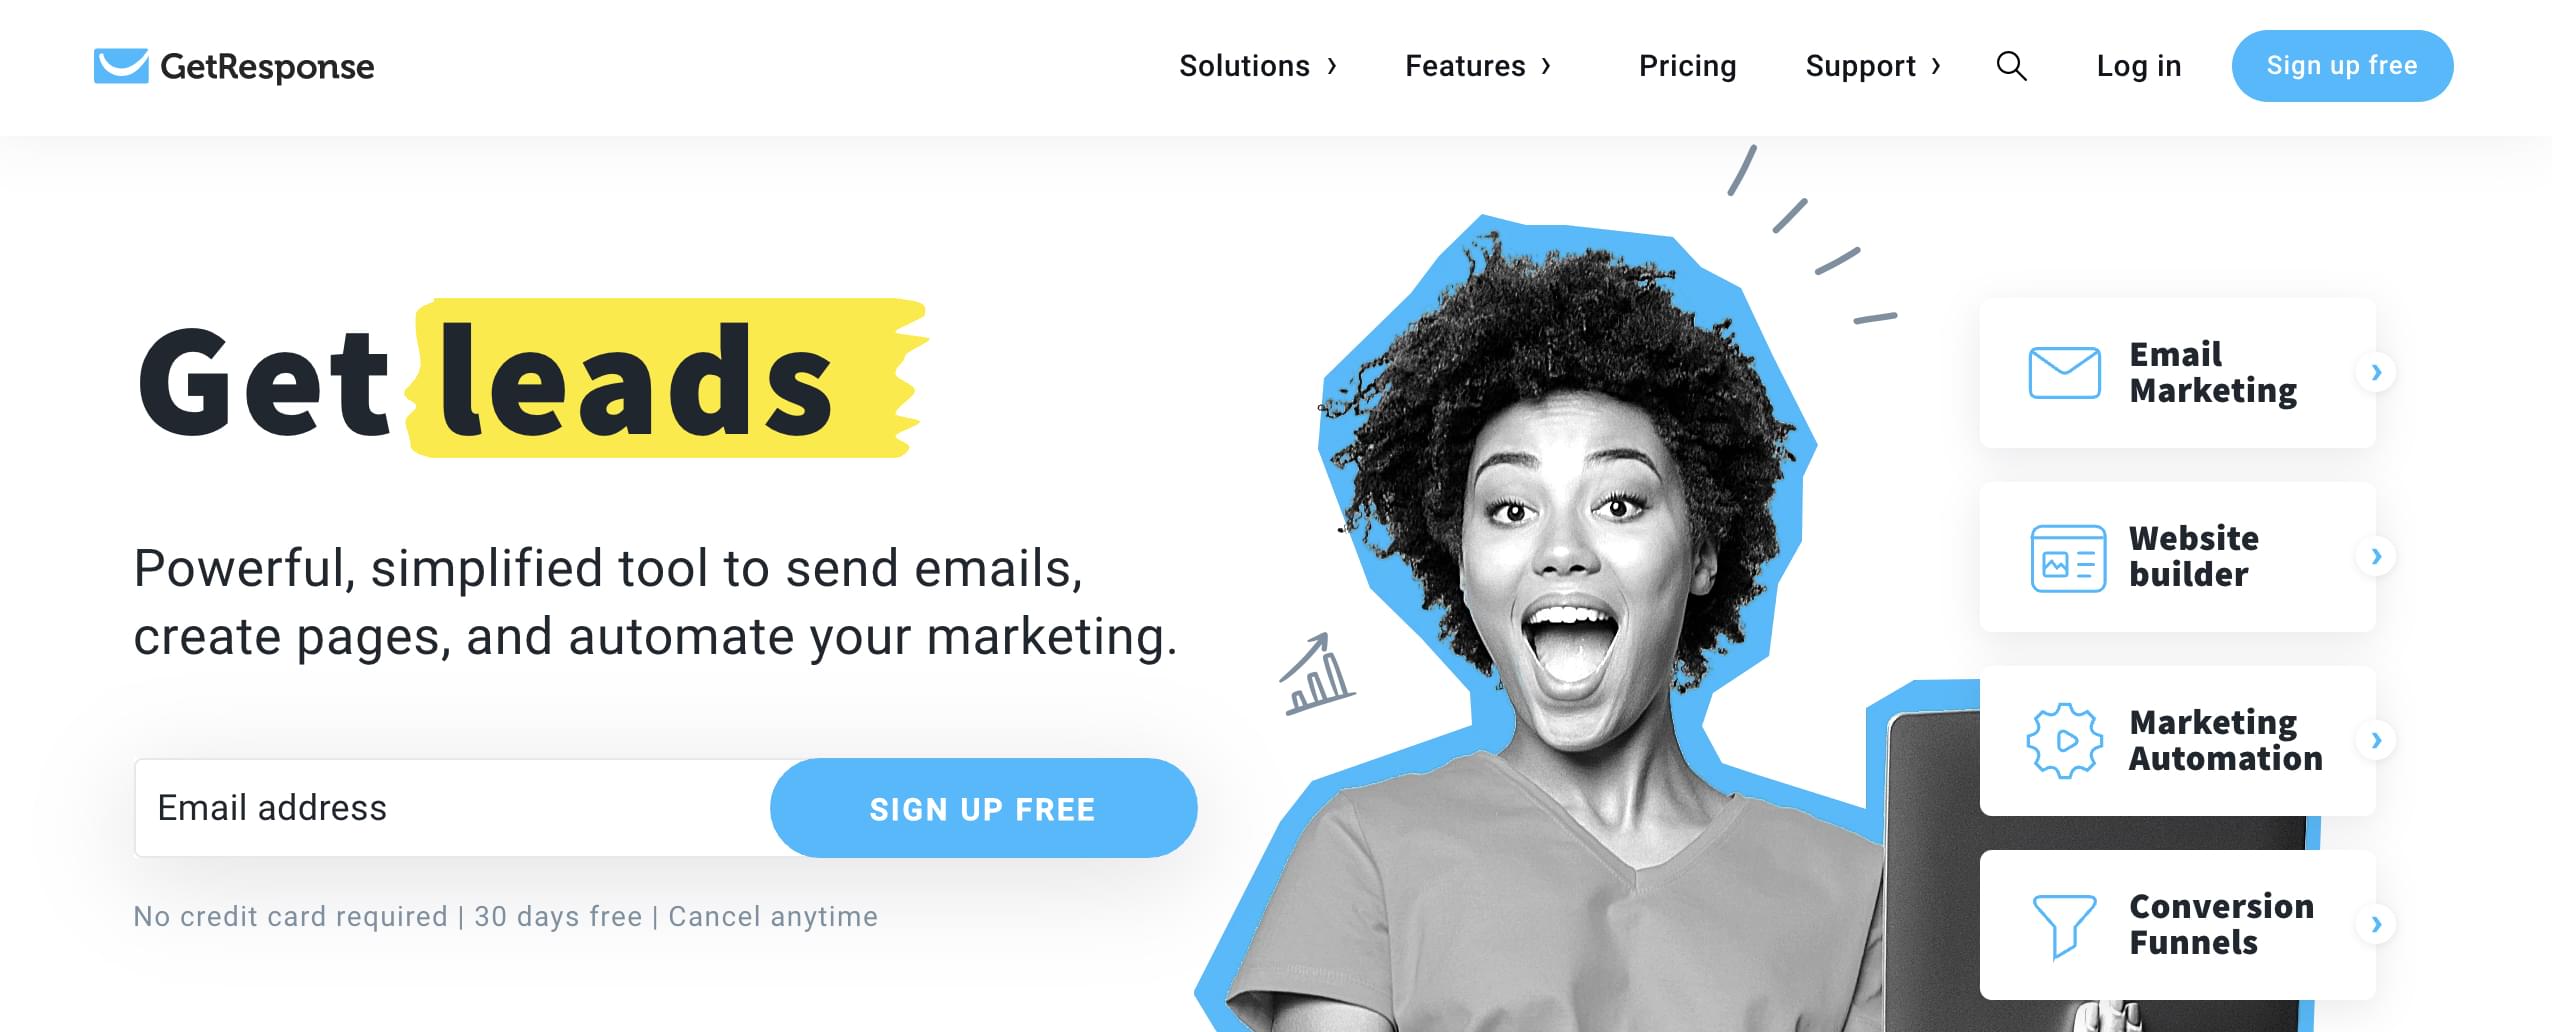 Email marketing automation tool GetResponse